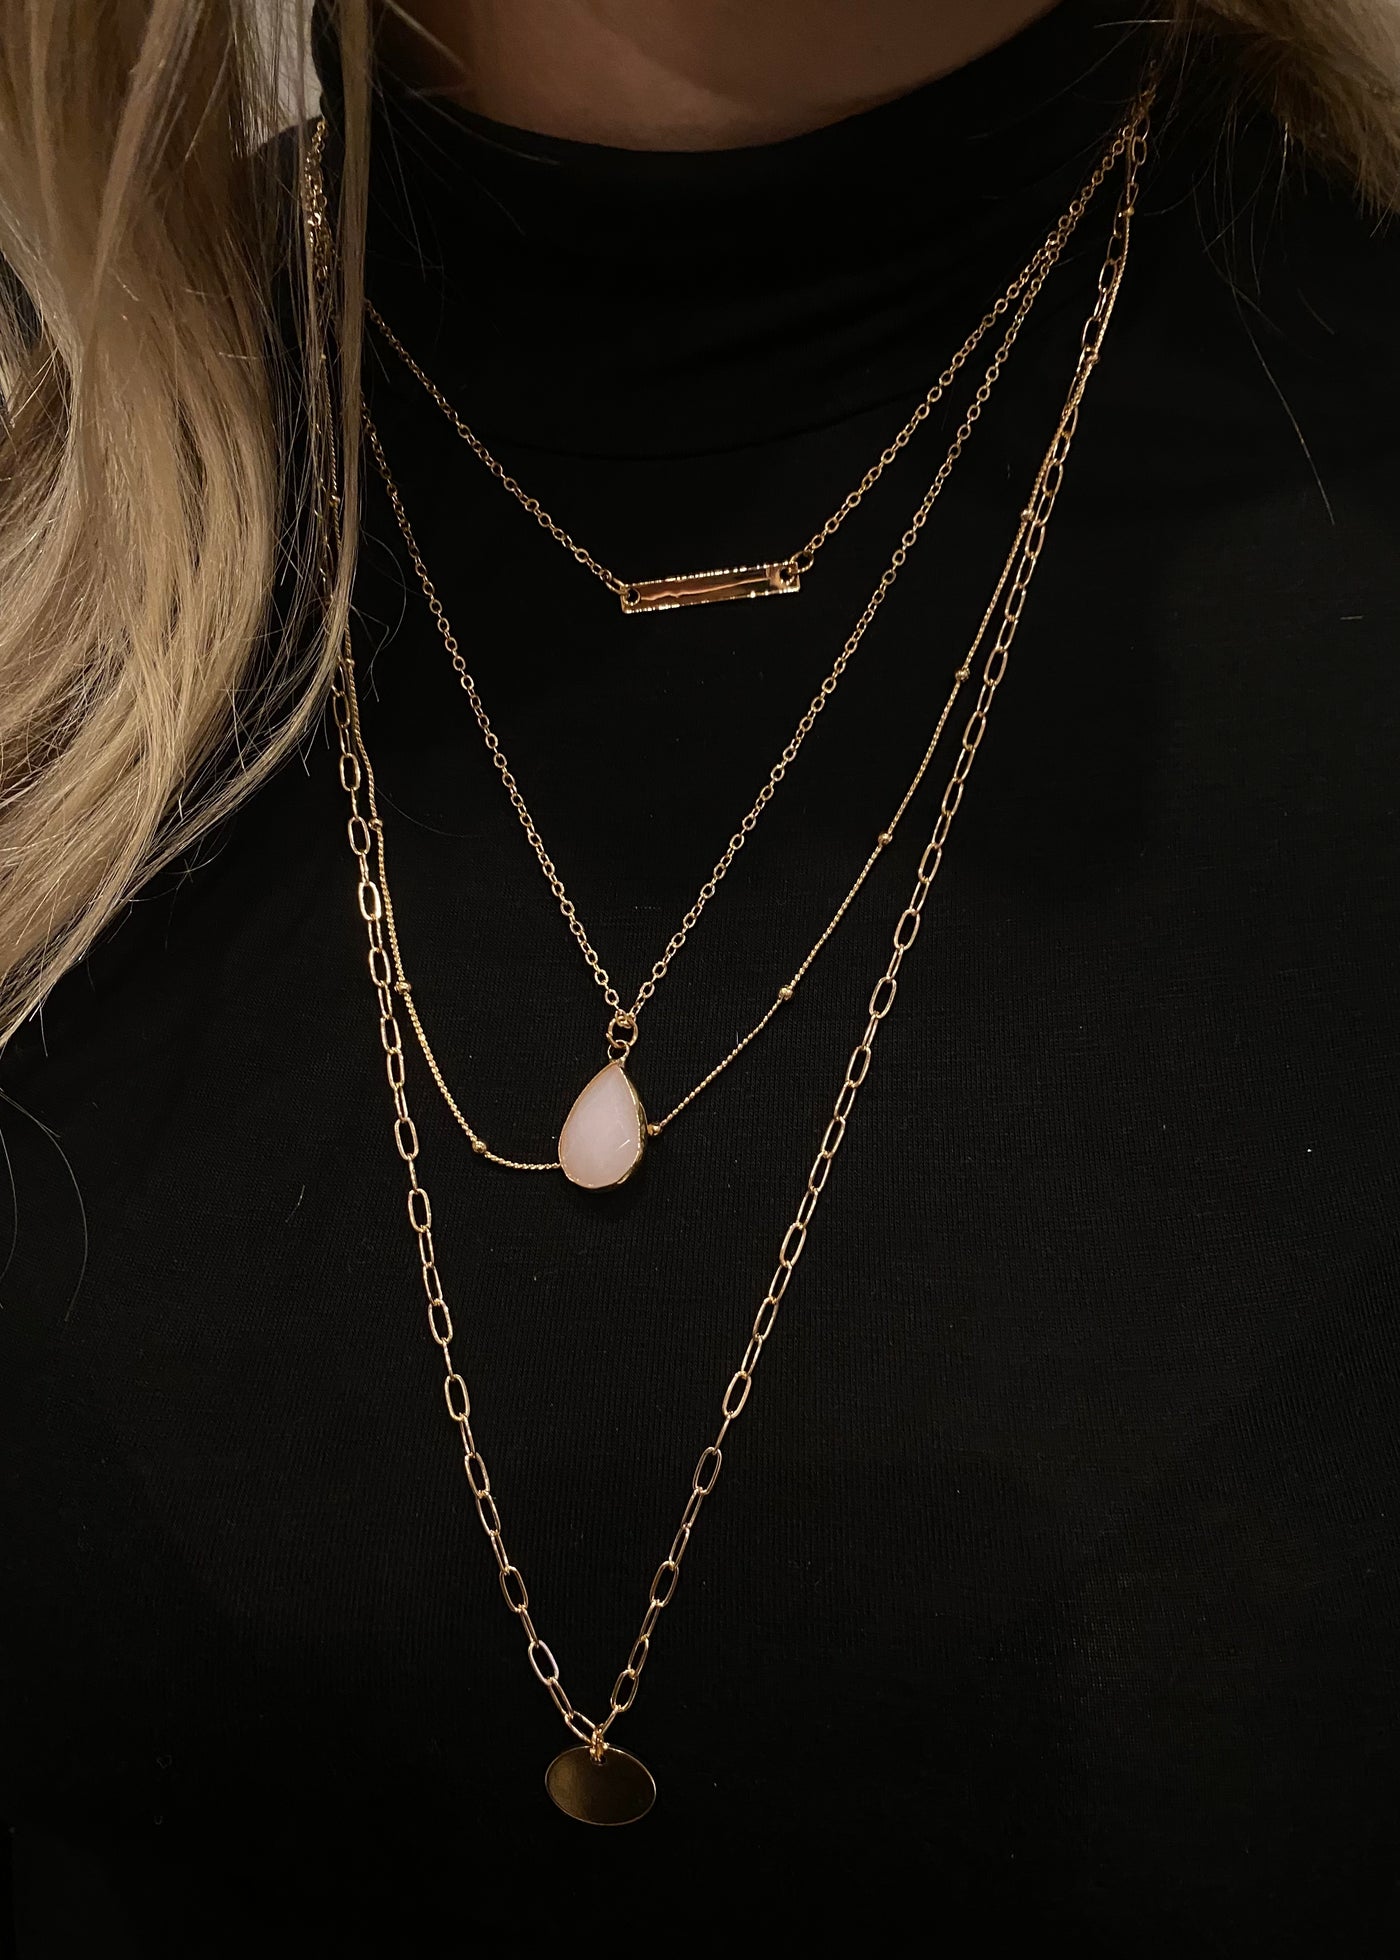 4 Layer Necklace with Pink stone